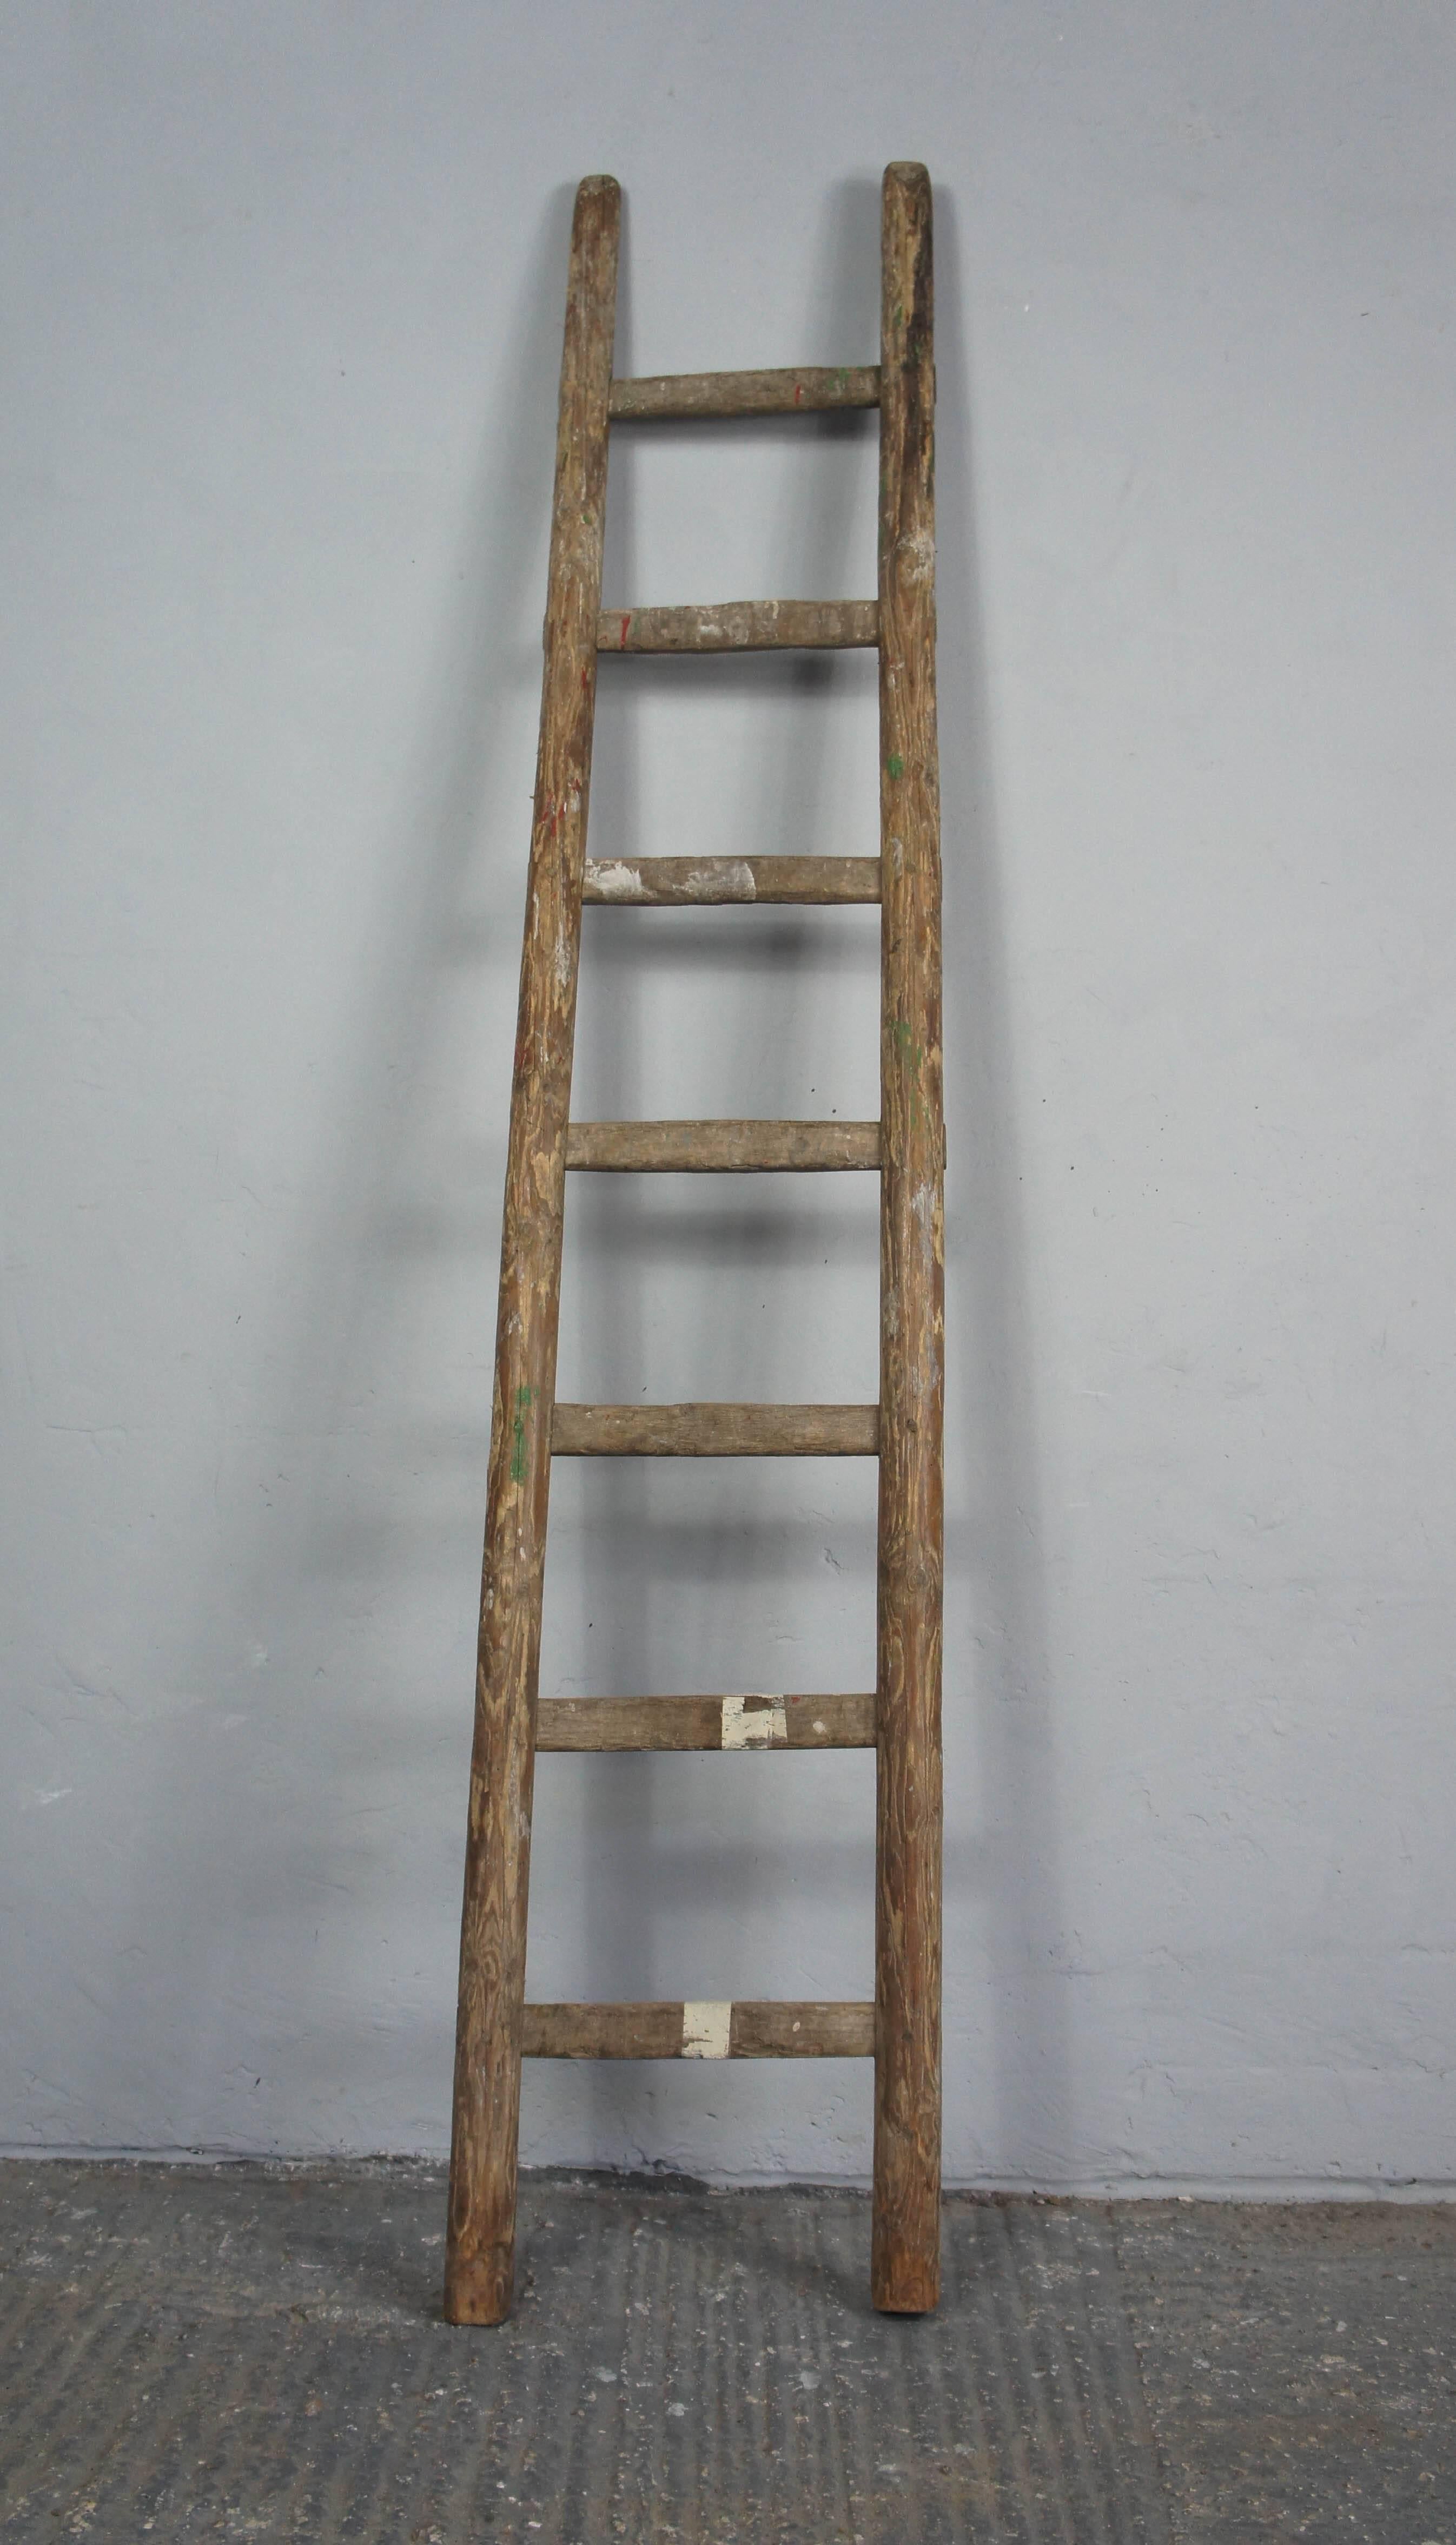 Rustic wooden ladder, perfect for hanging towels on in the bathroom.